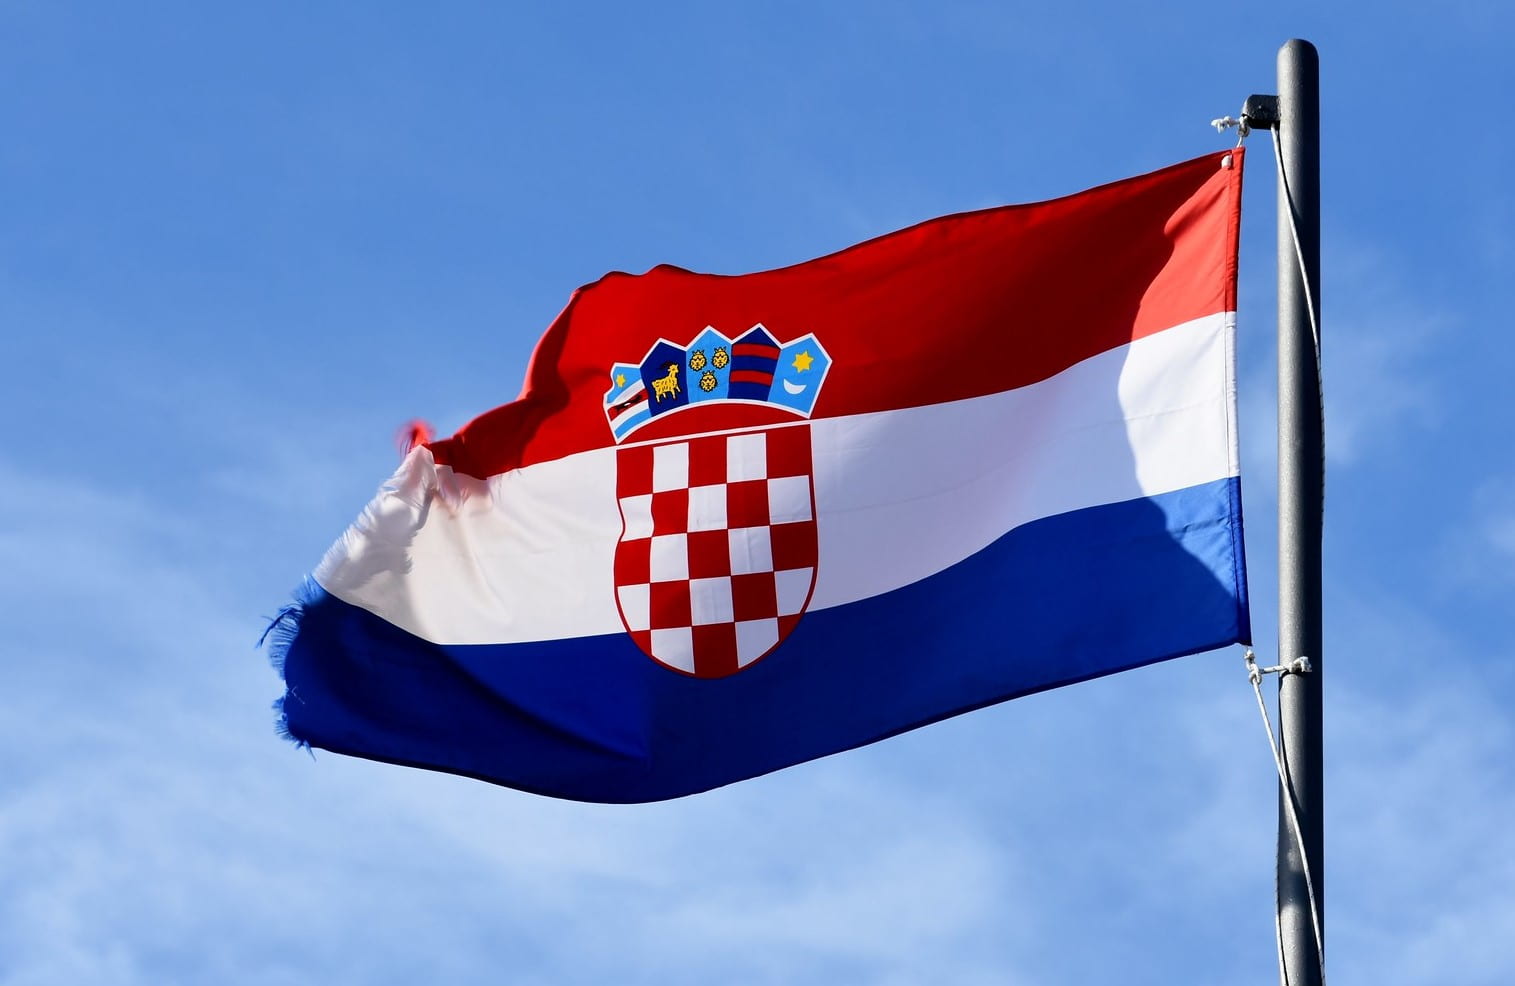 The flag of Croatia. Photo by Richard Mortel / Flickr via CC BY 2.0 DEED